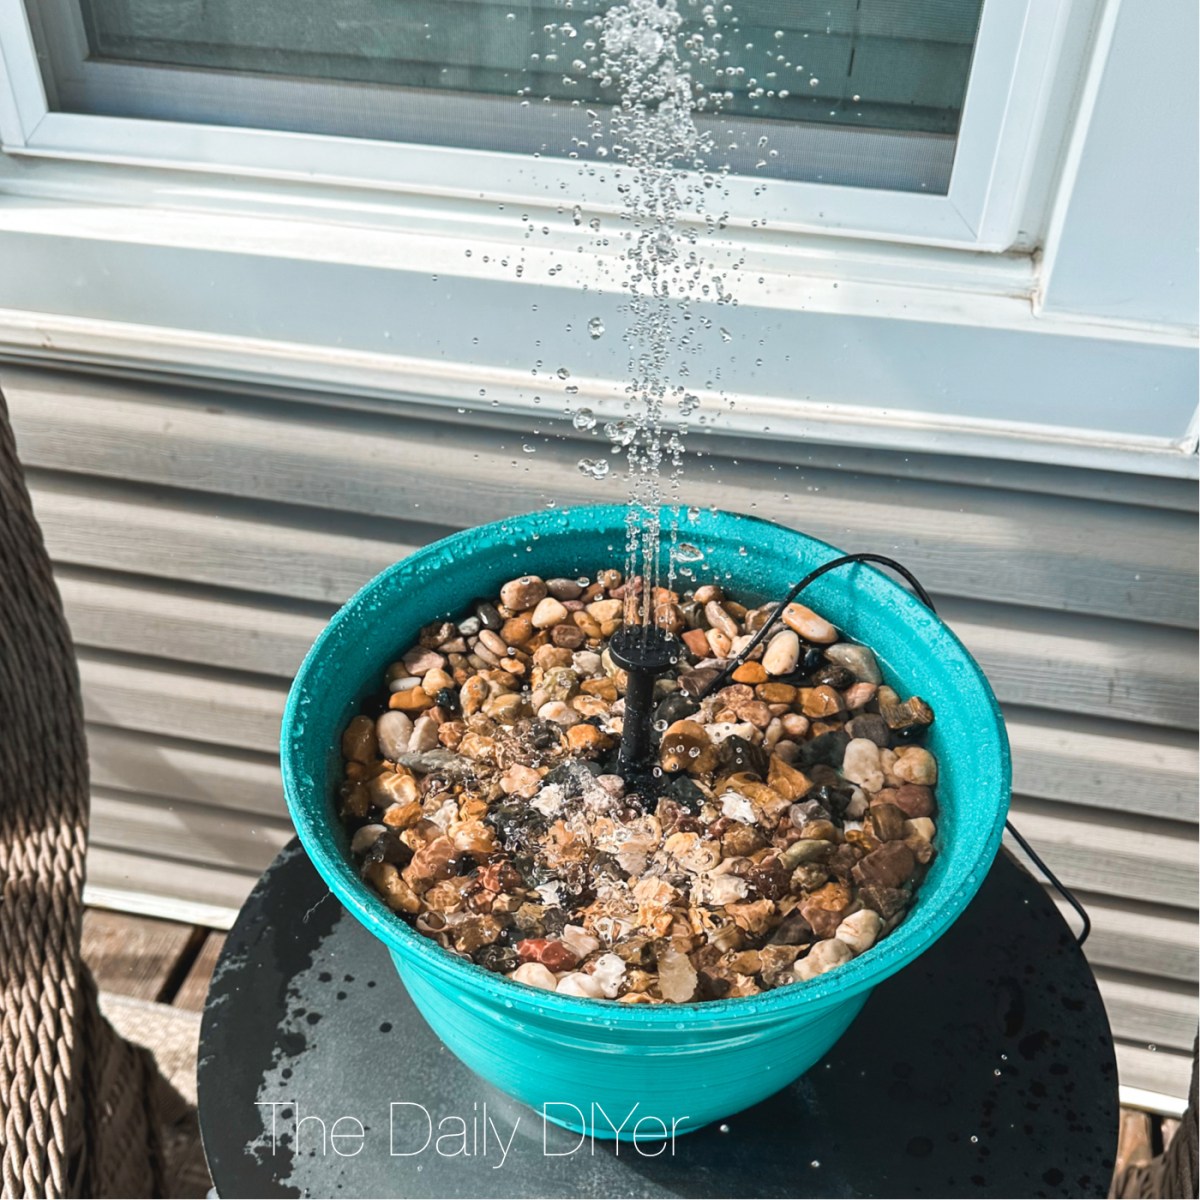 diy dollar tree craft of a teal flower pot filled with rocks and a fountain pump